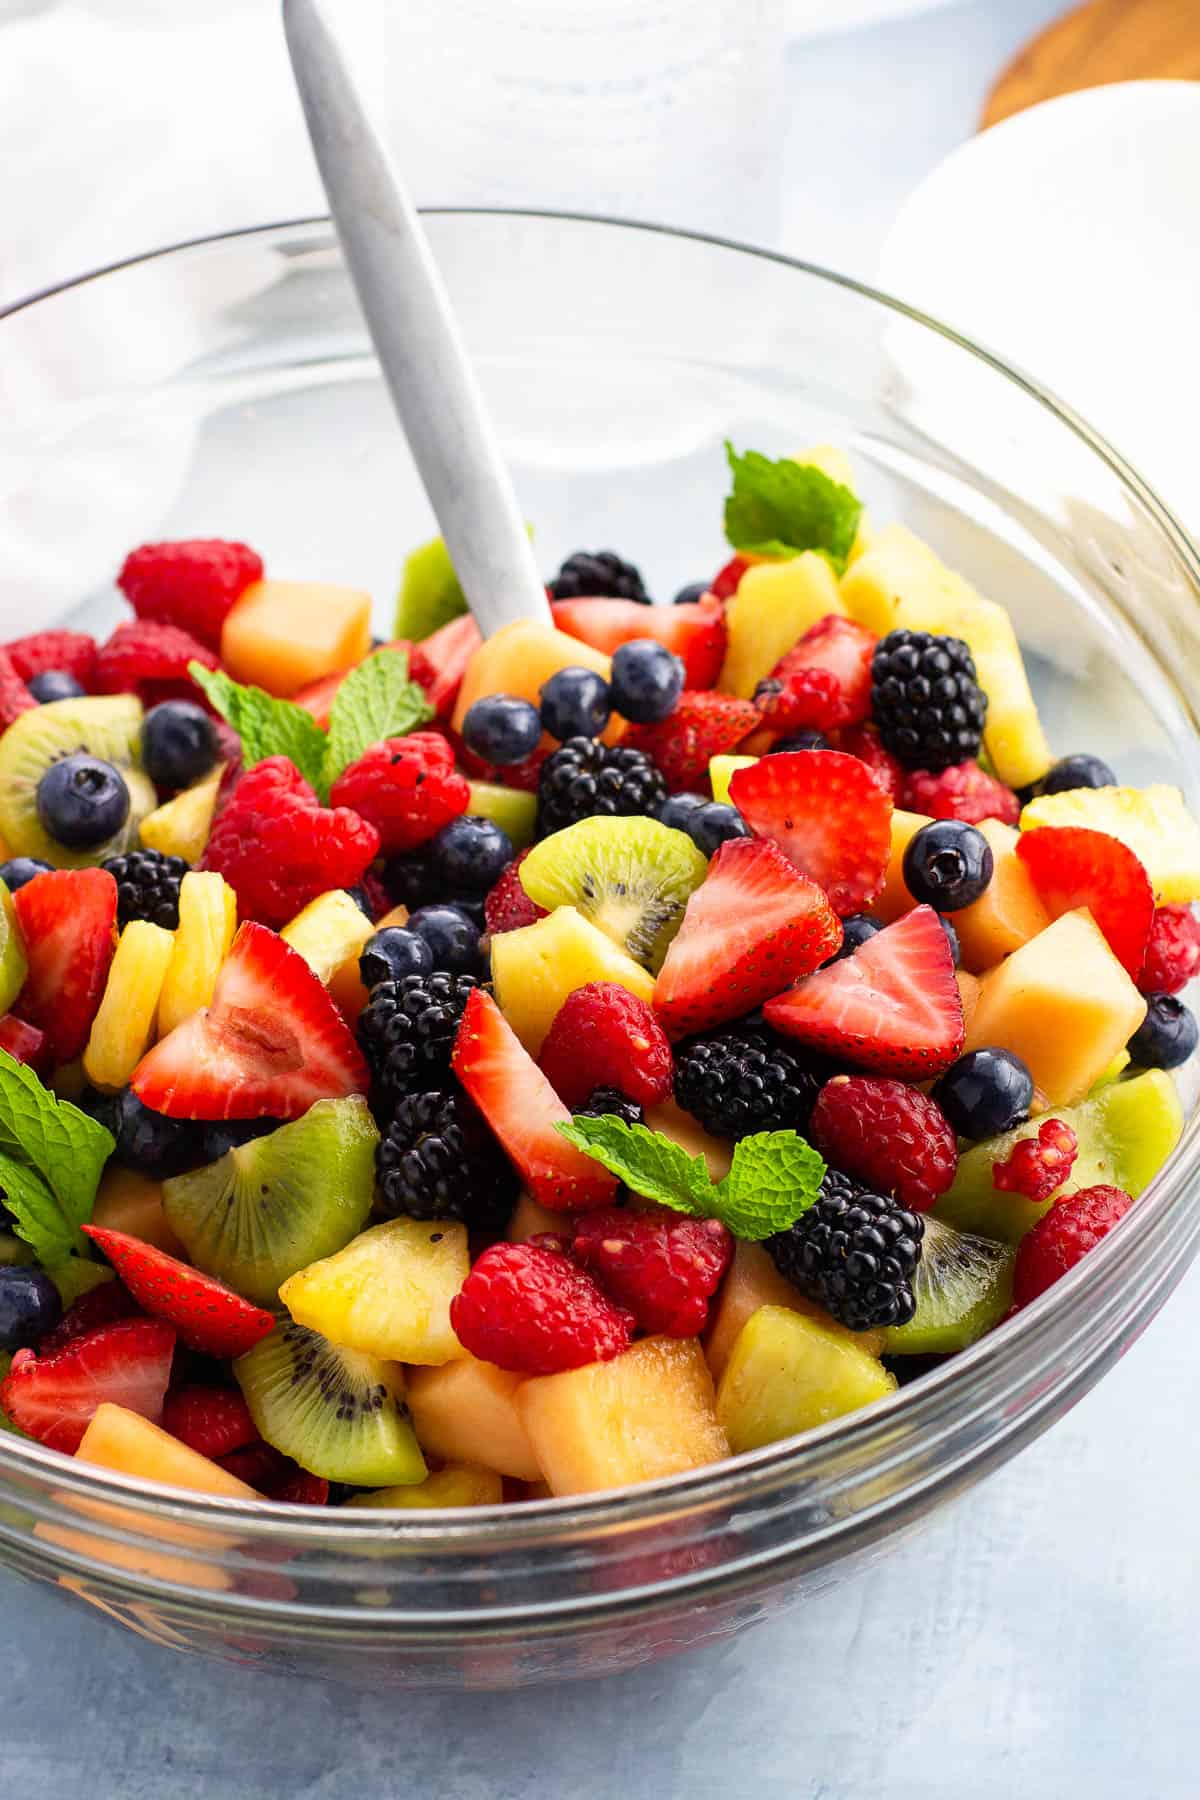 Fruit salad tossed in anise cinnamon syrup in a serving bowl garnished with mint leaves.